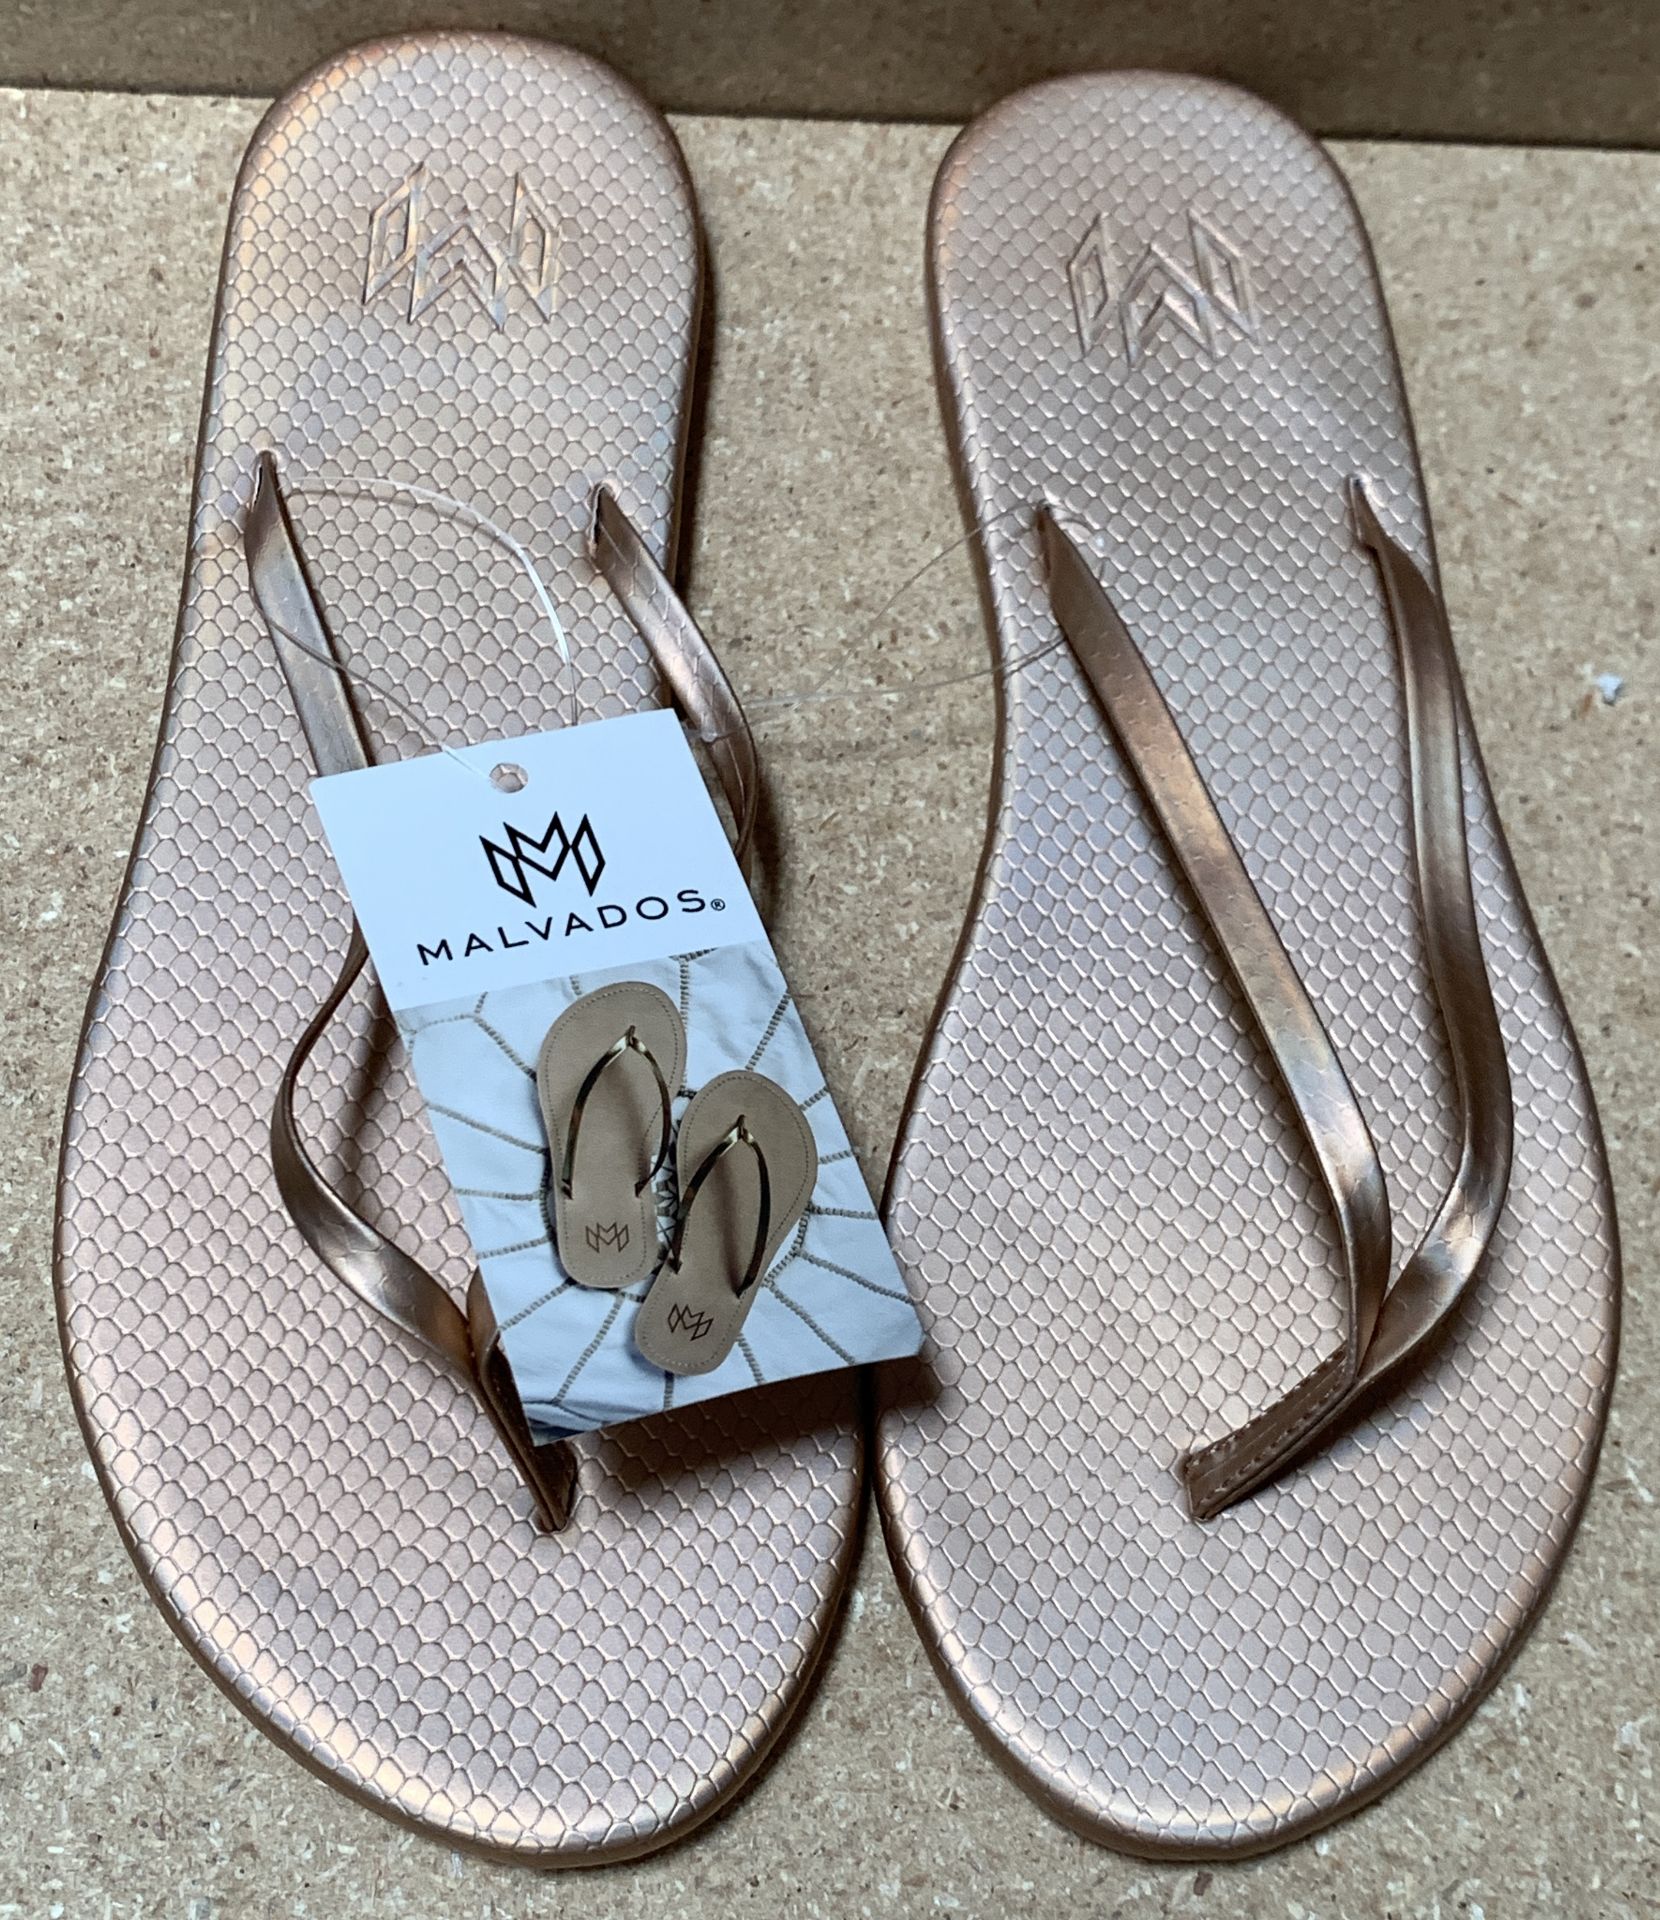 7 Pairs Malvados Flip Flop Sandals, New with Tags, Various Sizes, Lux Reptile Cognac (Value $343) - Image 3 of 5